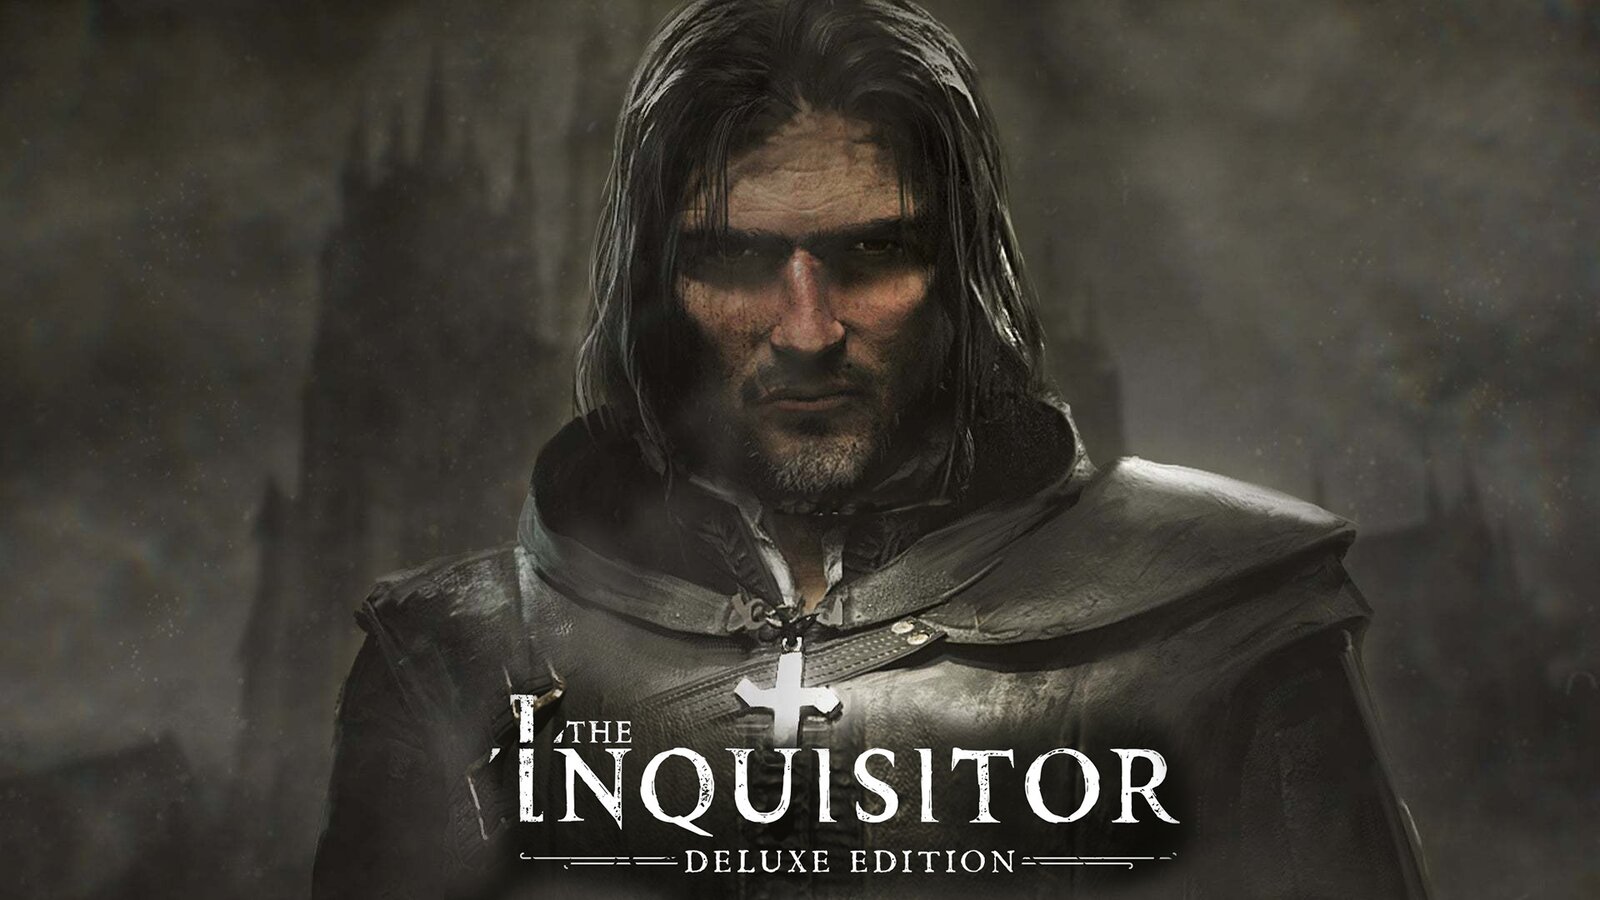 The Inquisitor - Digital Deluxe Edition